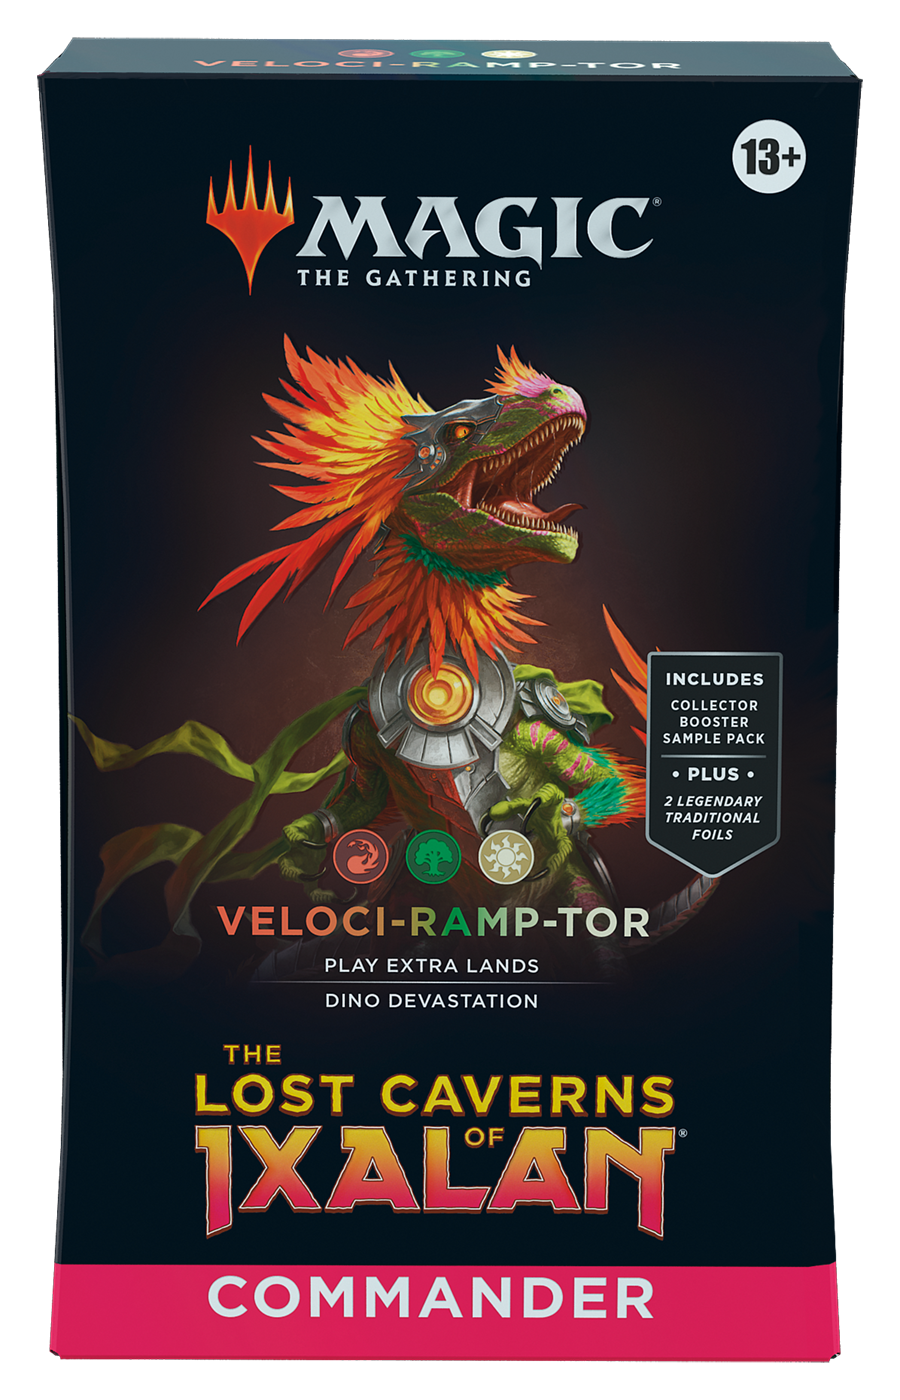 Wizards of the Coast Magic The Gathering - The Lost Caverns of Ixalan Commander Deck Varianta: Veloci-ramp-tor